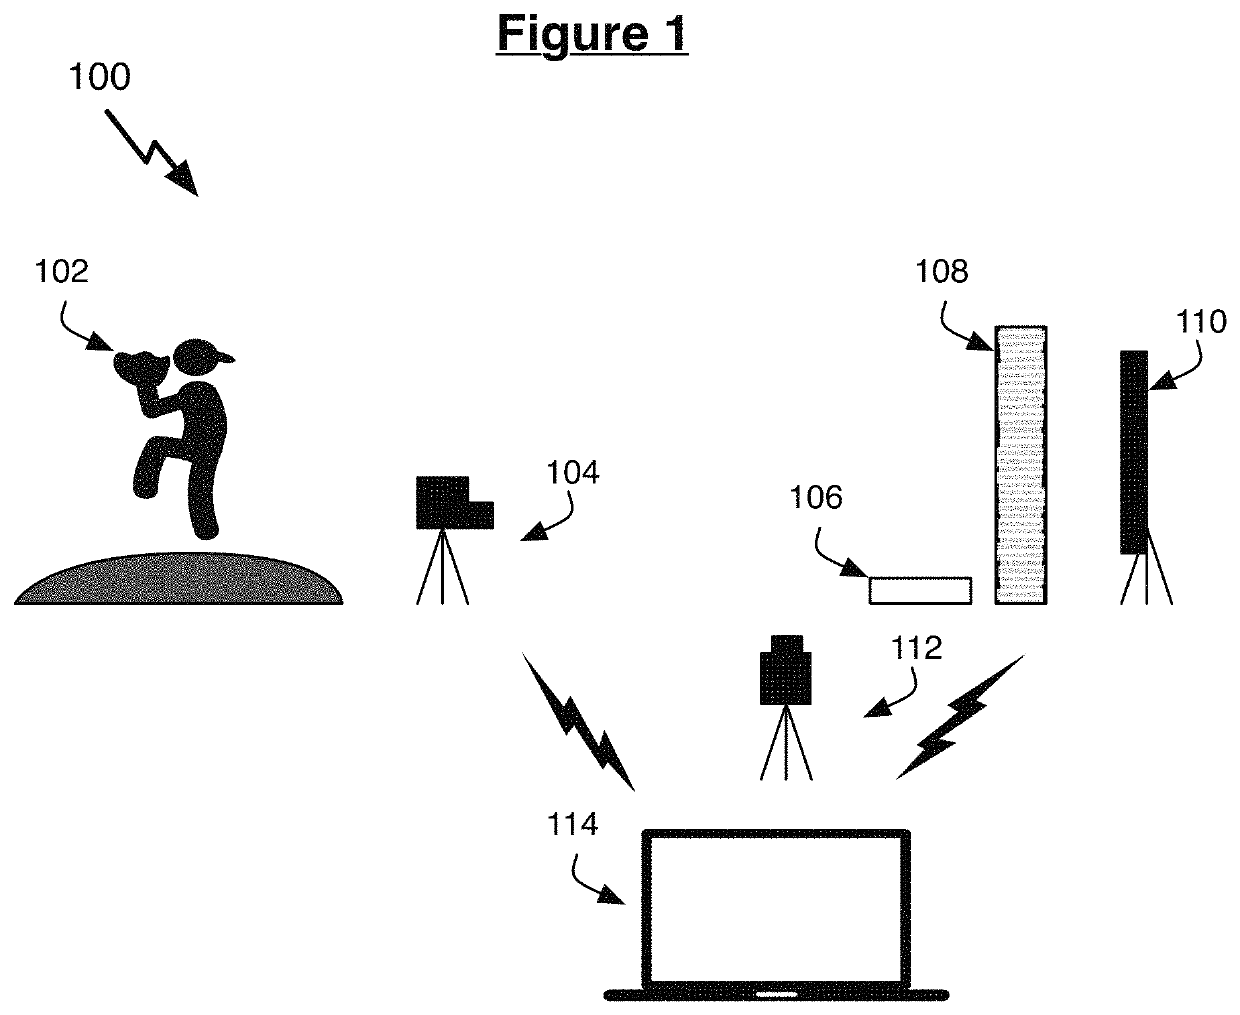 Athletic performance by tracking objects hit or thrown at an electronic display